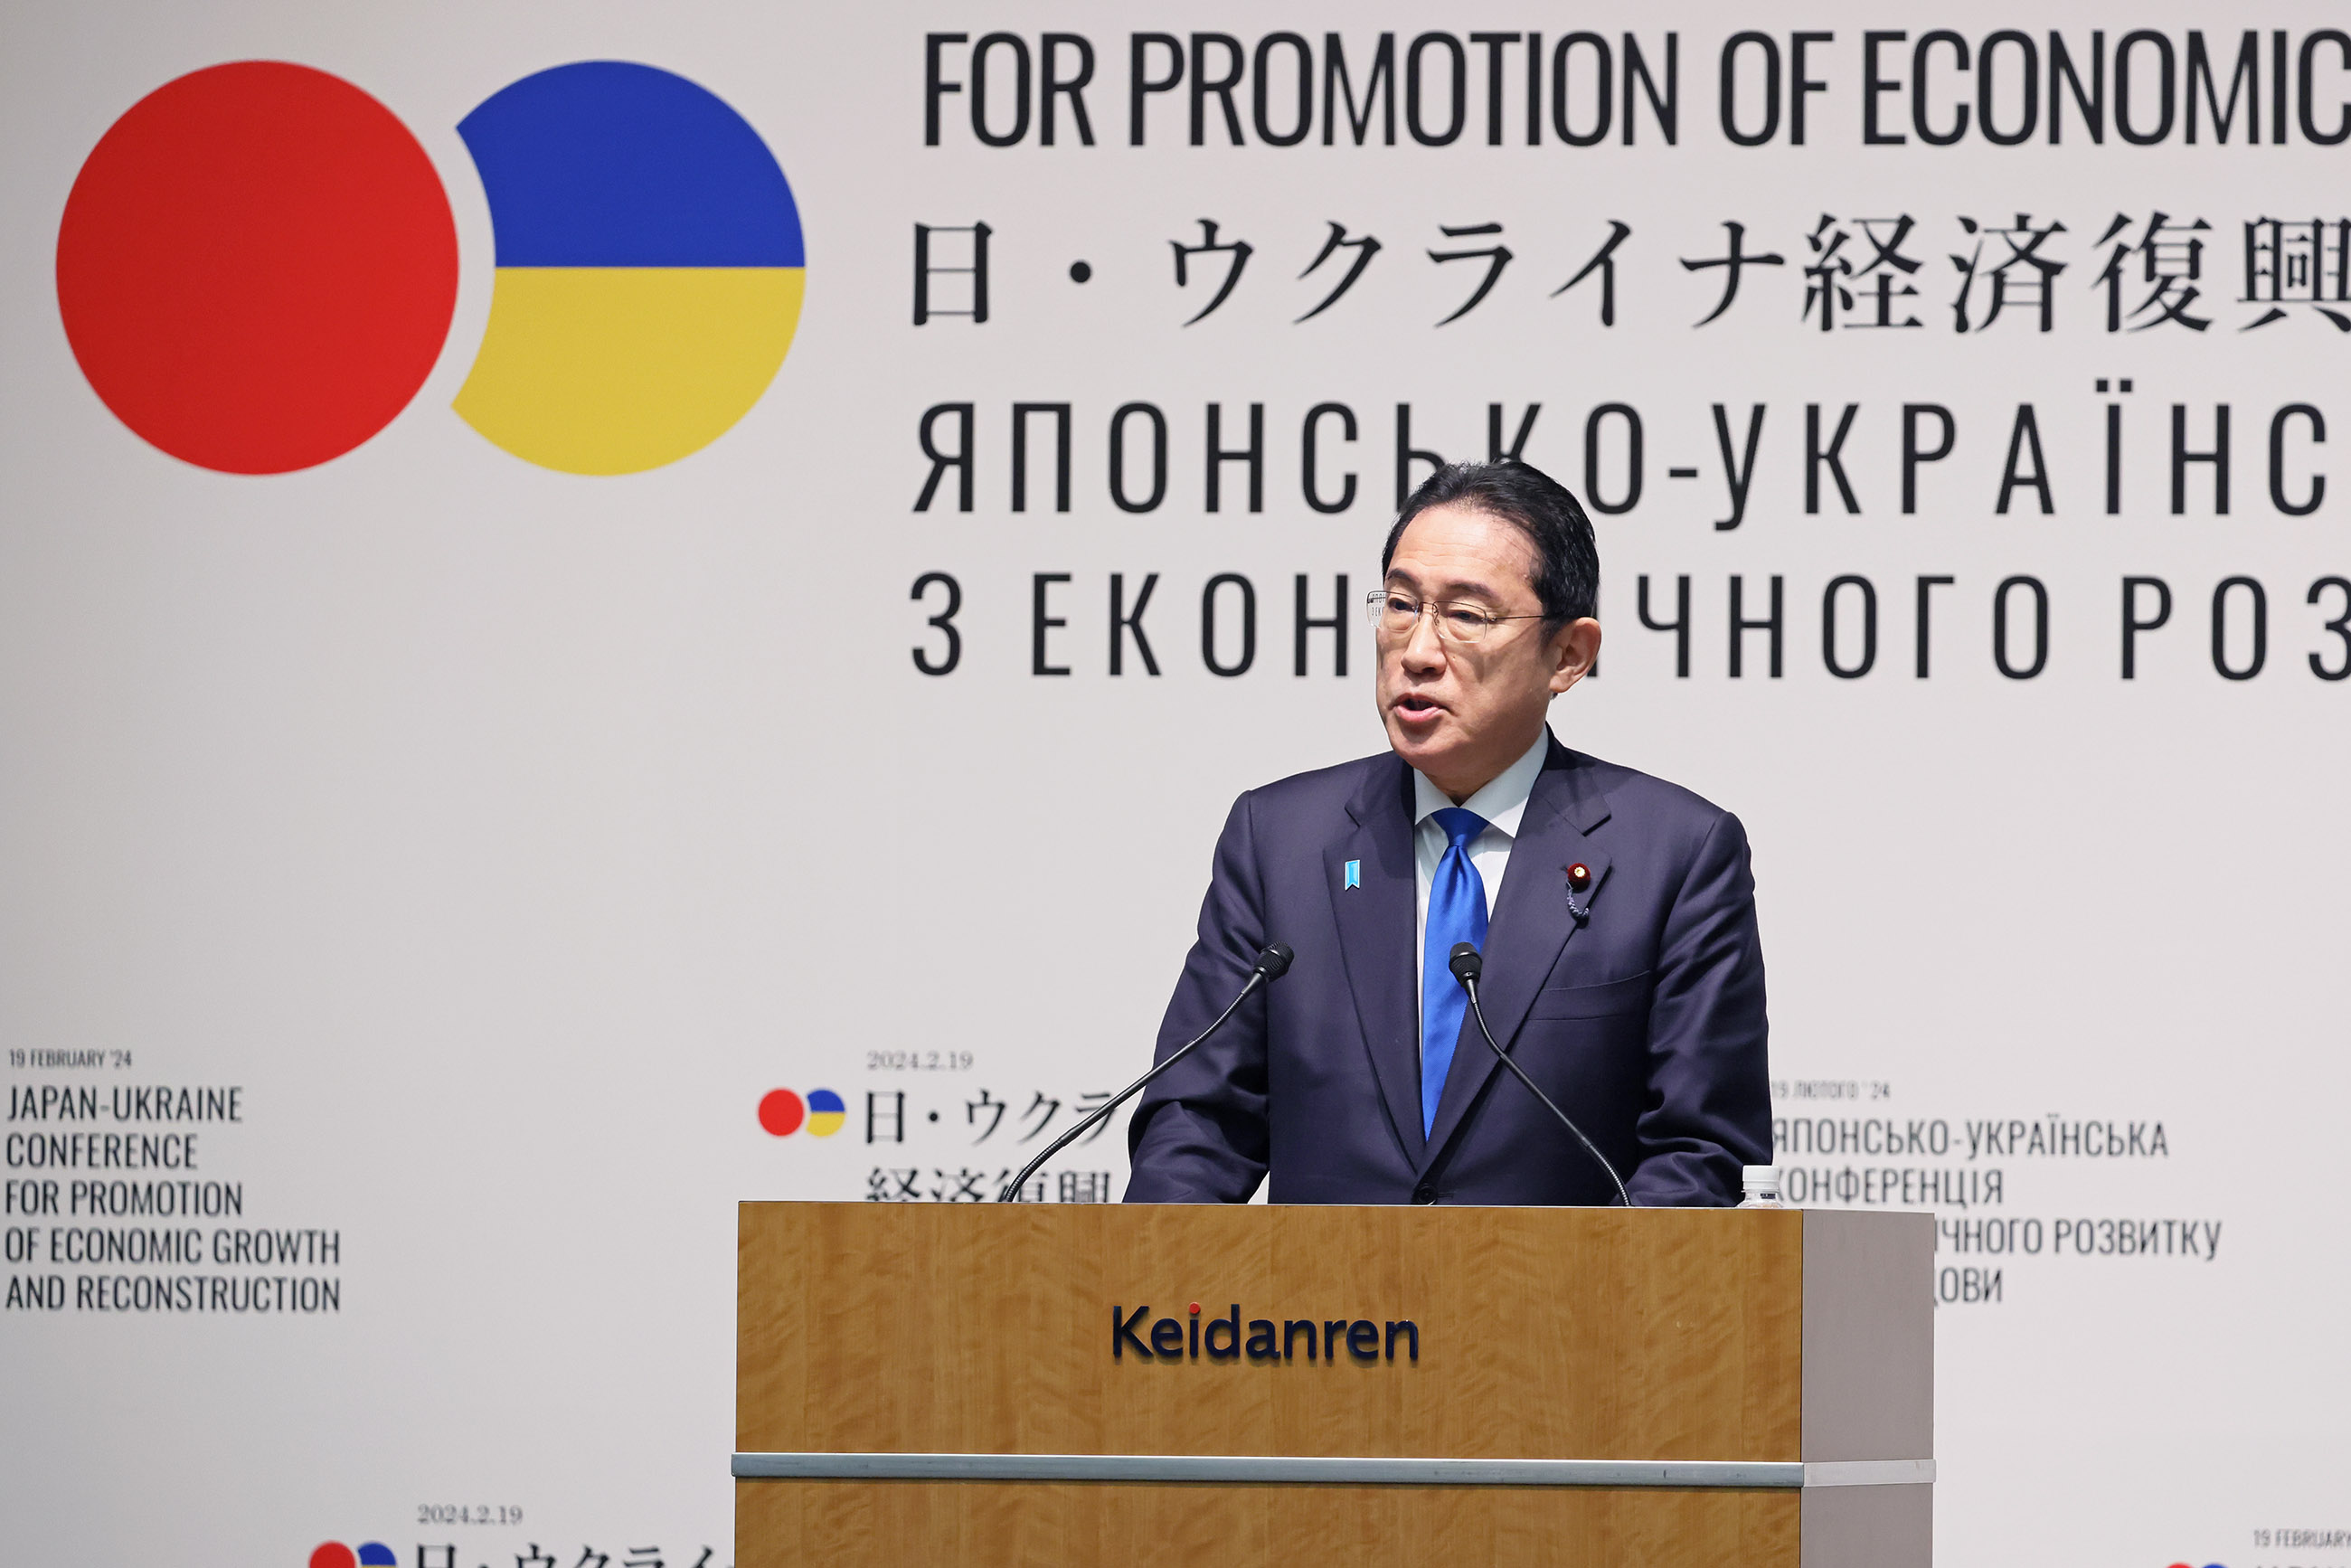 Japan-Ukraine Conference for Promotion of Economic Growth and Reconstruction